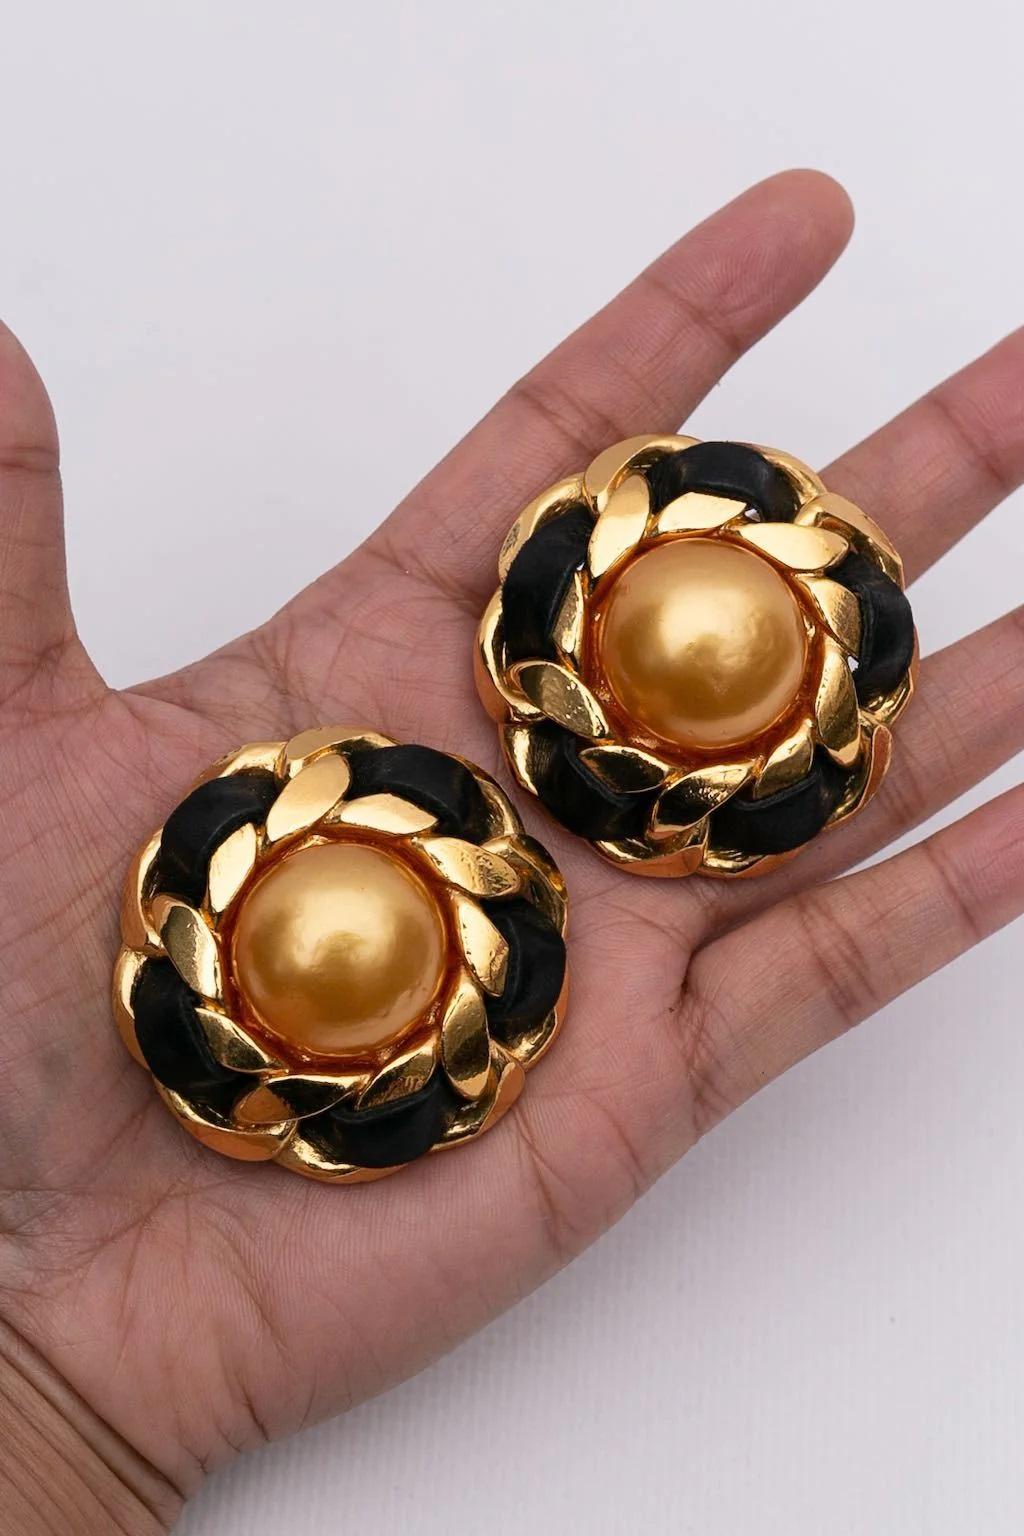 Chanel Clip-on Earrings in Gilted Metal, Cabochon & Leather, 1990s For Sale 4